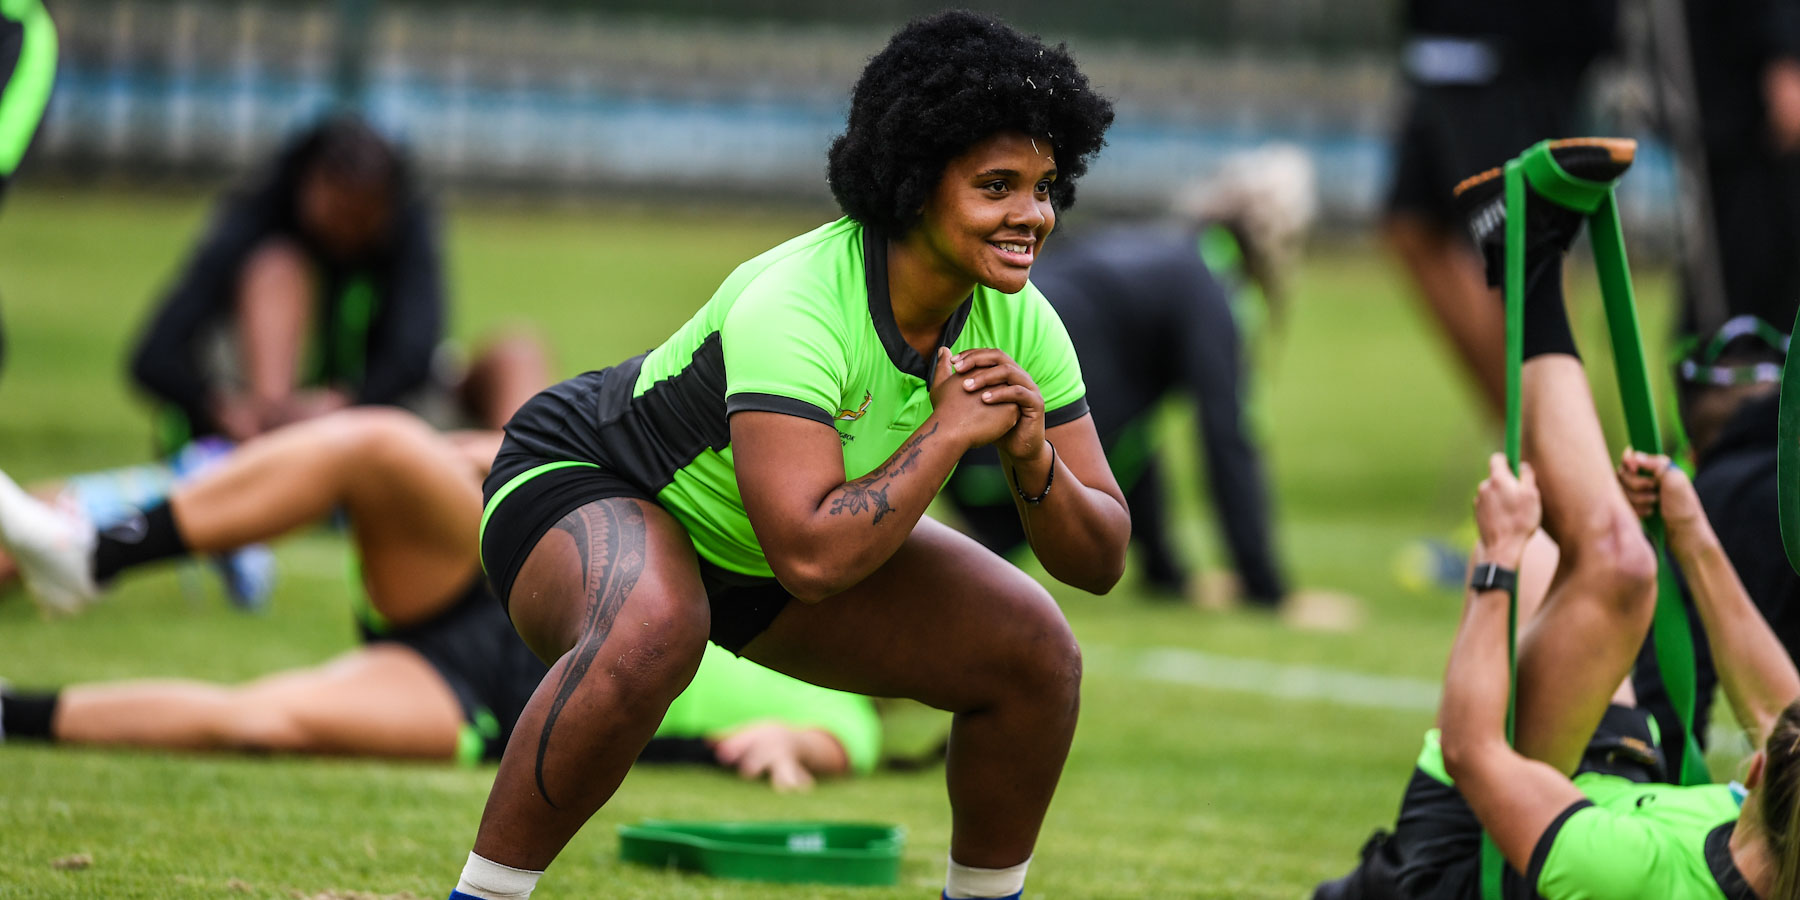 Roseline Botes is in line to make her Test debut on Saturday.